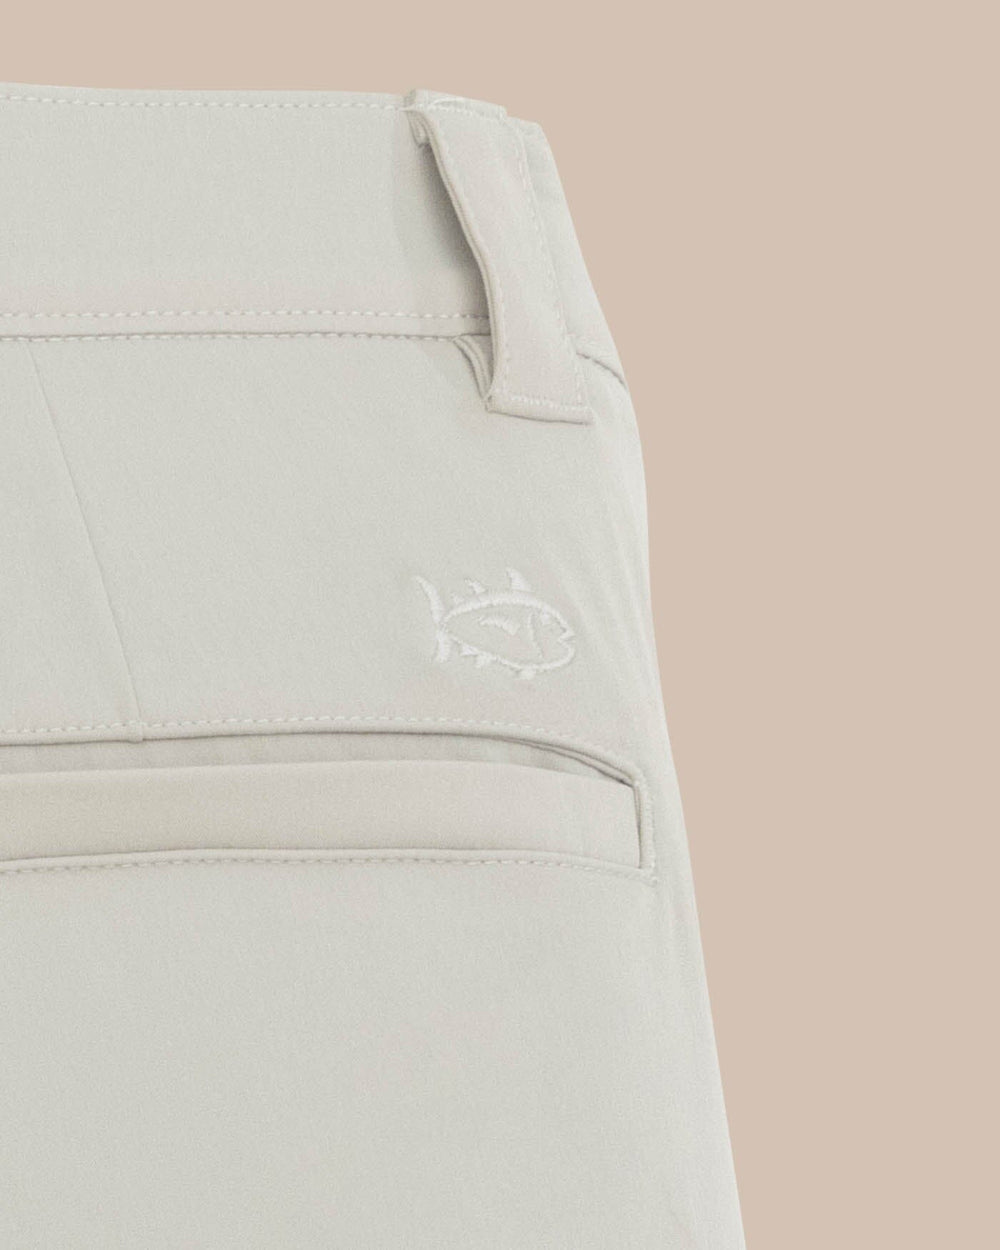 The detail view of the Southern Tide brrr die 10 Short by Southern Tide - Stone